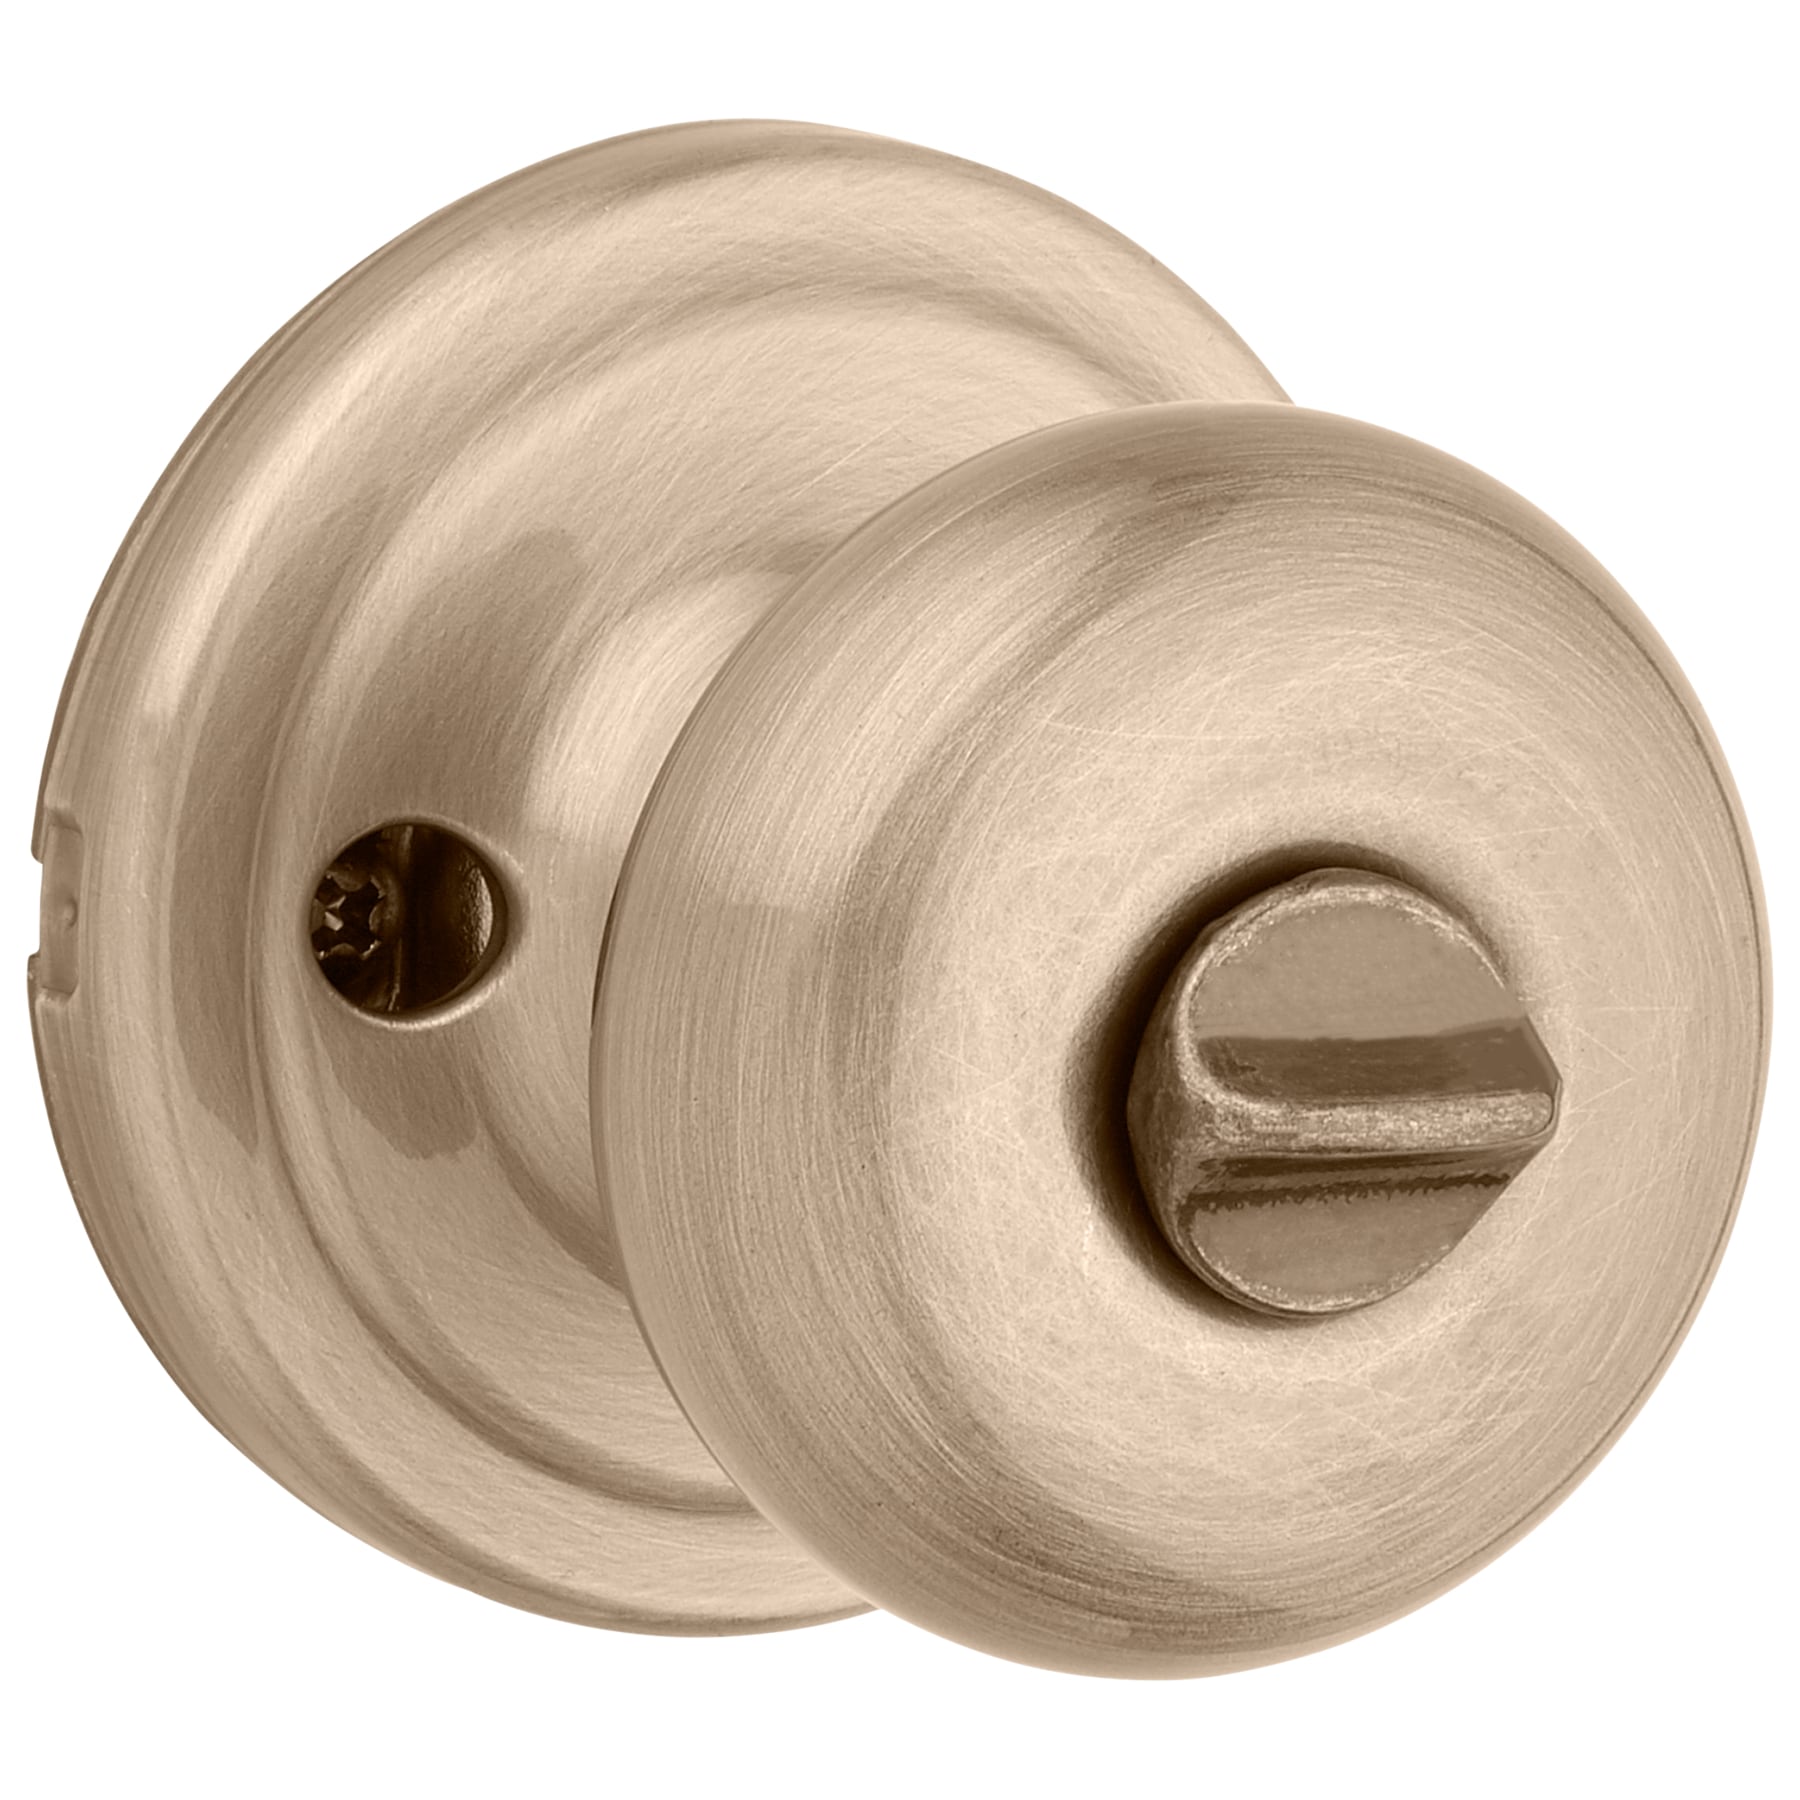 Kwikset Signature Series Signatures Juno Antique Brass Smartkey Exterior No  Deadbolt Keyed Entry Door Knob with Antimicrobial Technology in the Door  Knobs department at